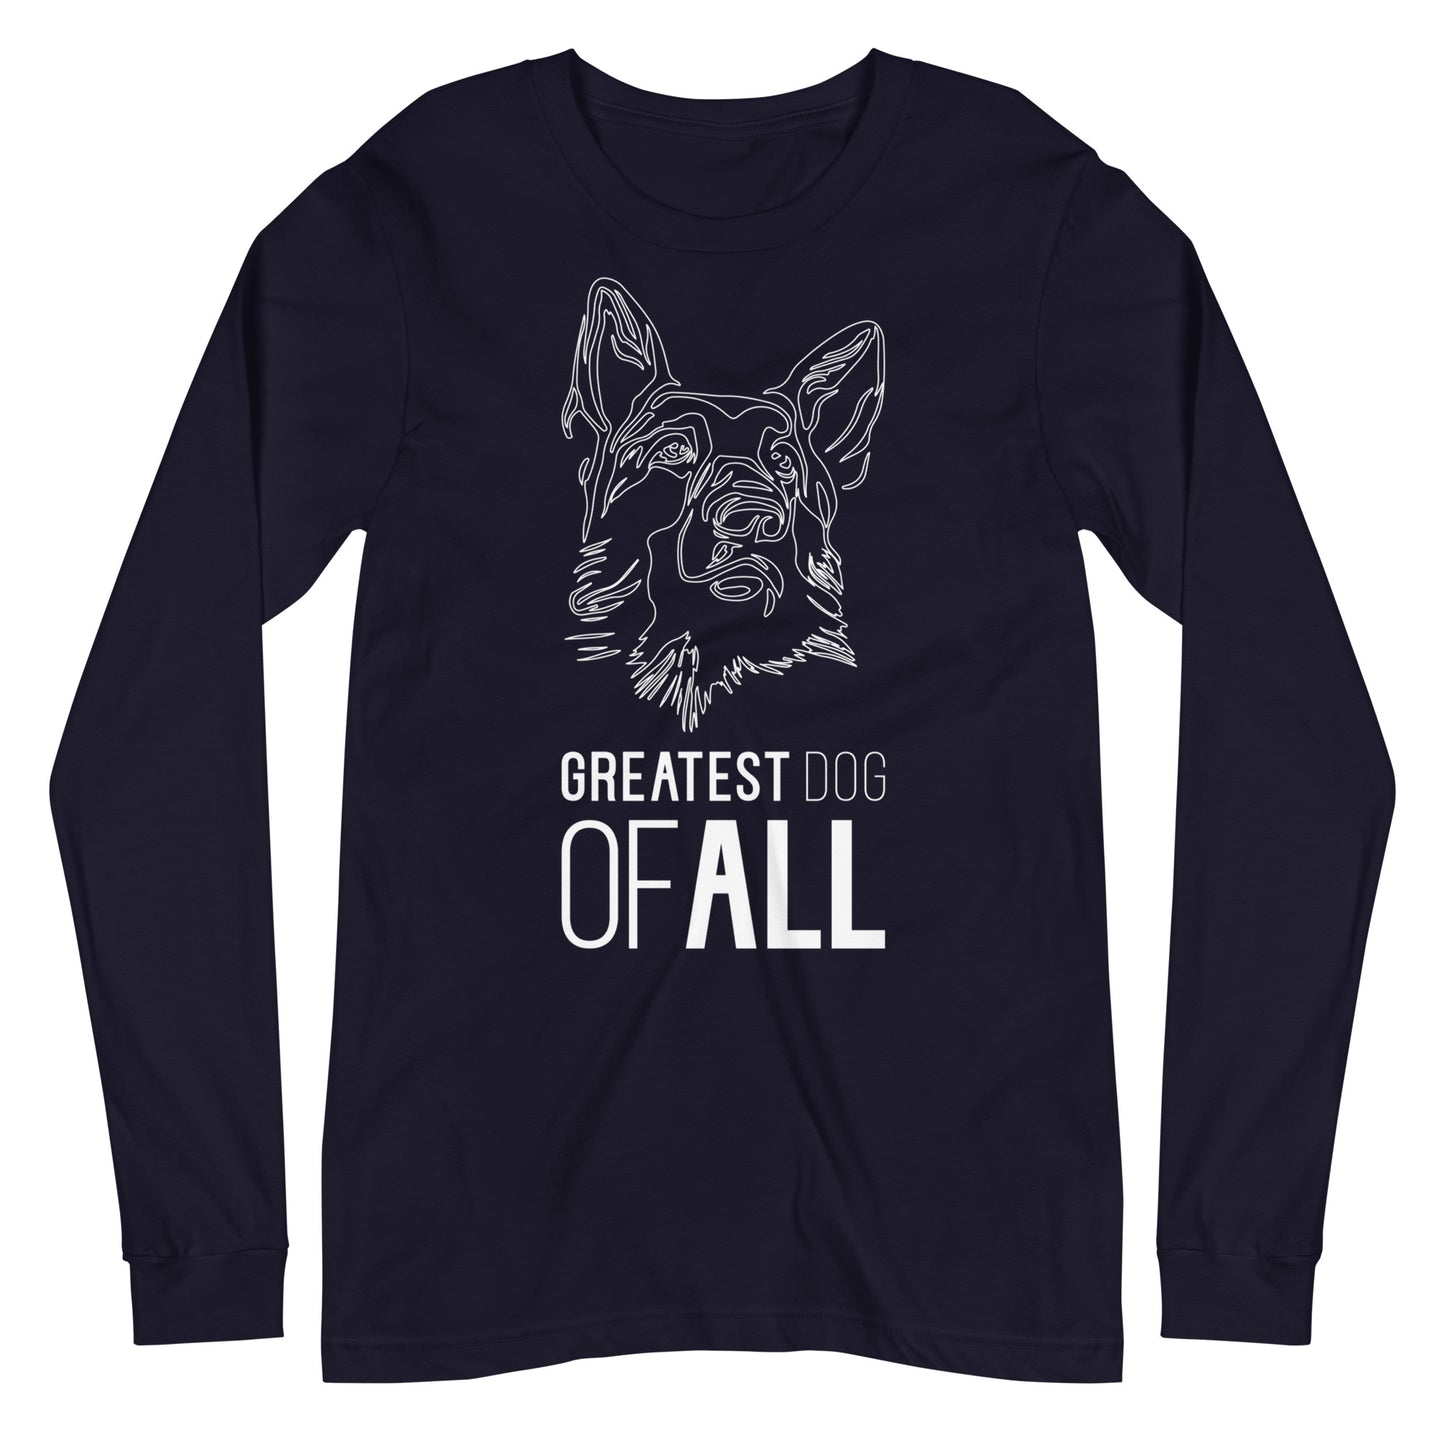 White line German Shepherd face with Greatest Dog of All caption on unisex navy long sleeve t-shirt